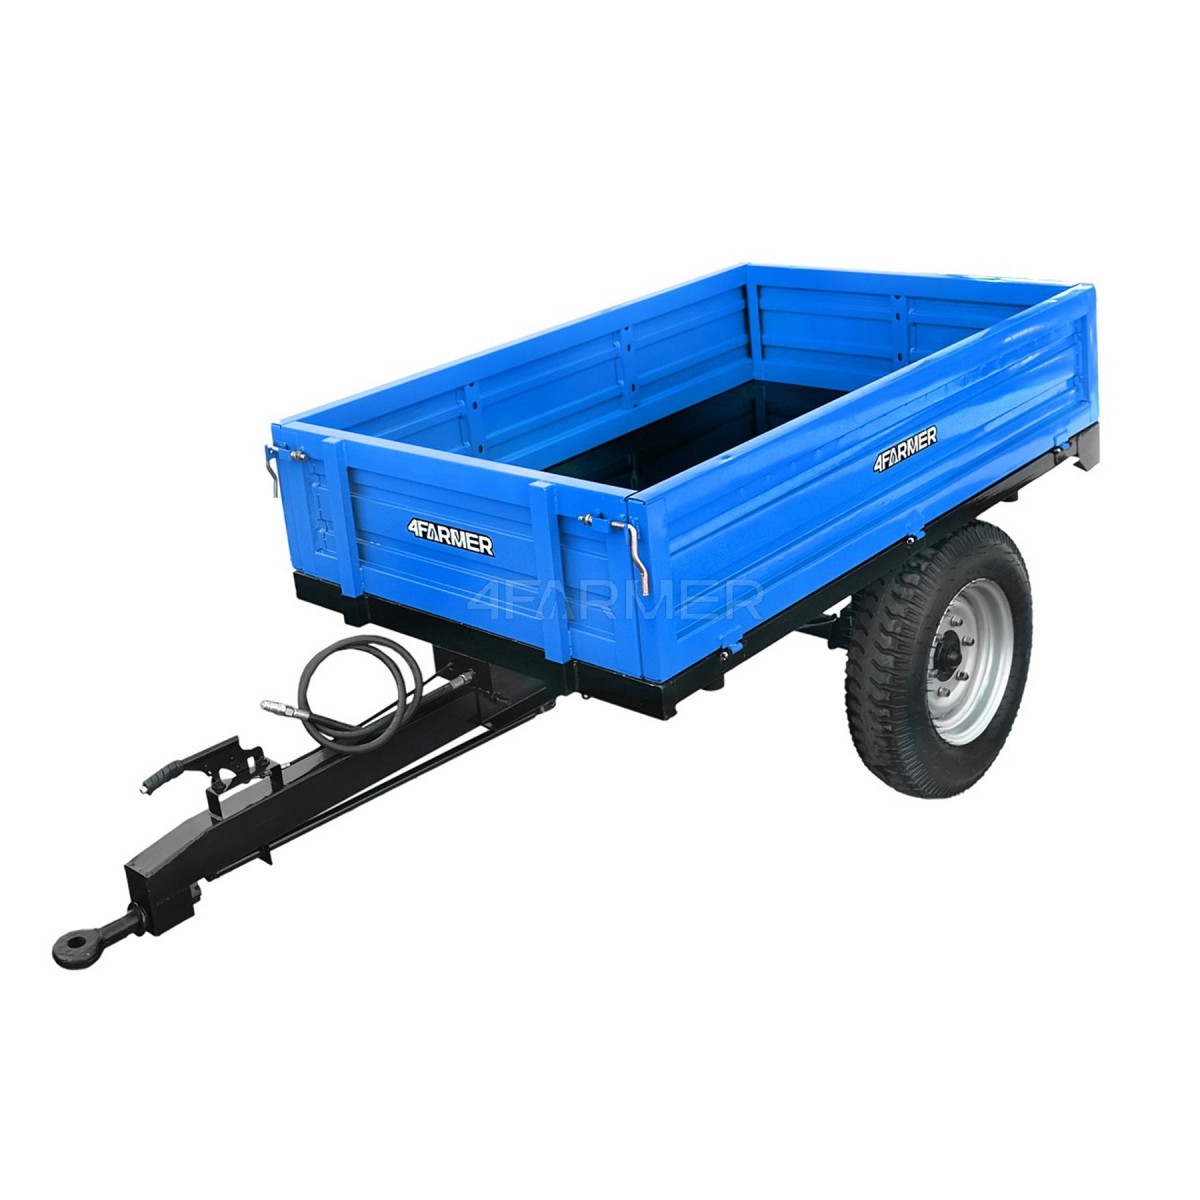 Single-axle agricultural trailer 1.5T with a 4FARMER tipper